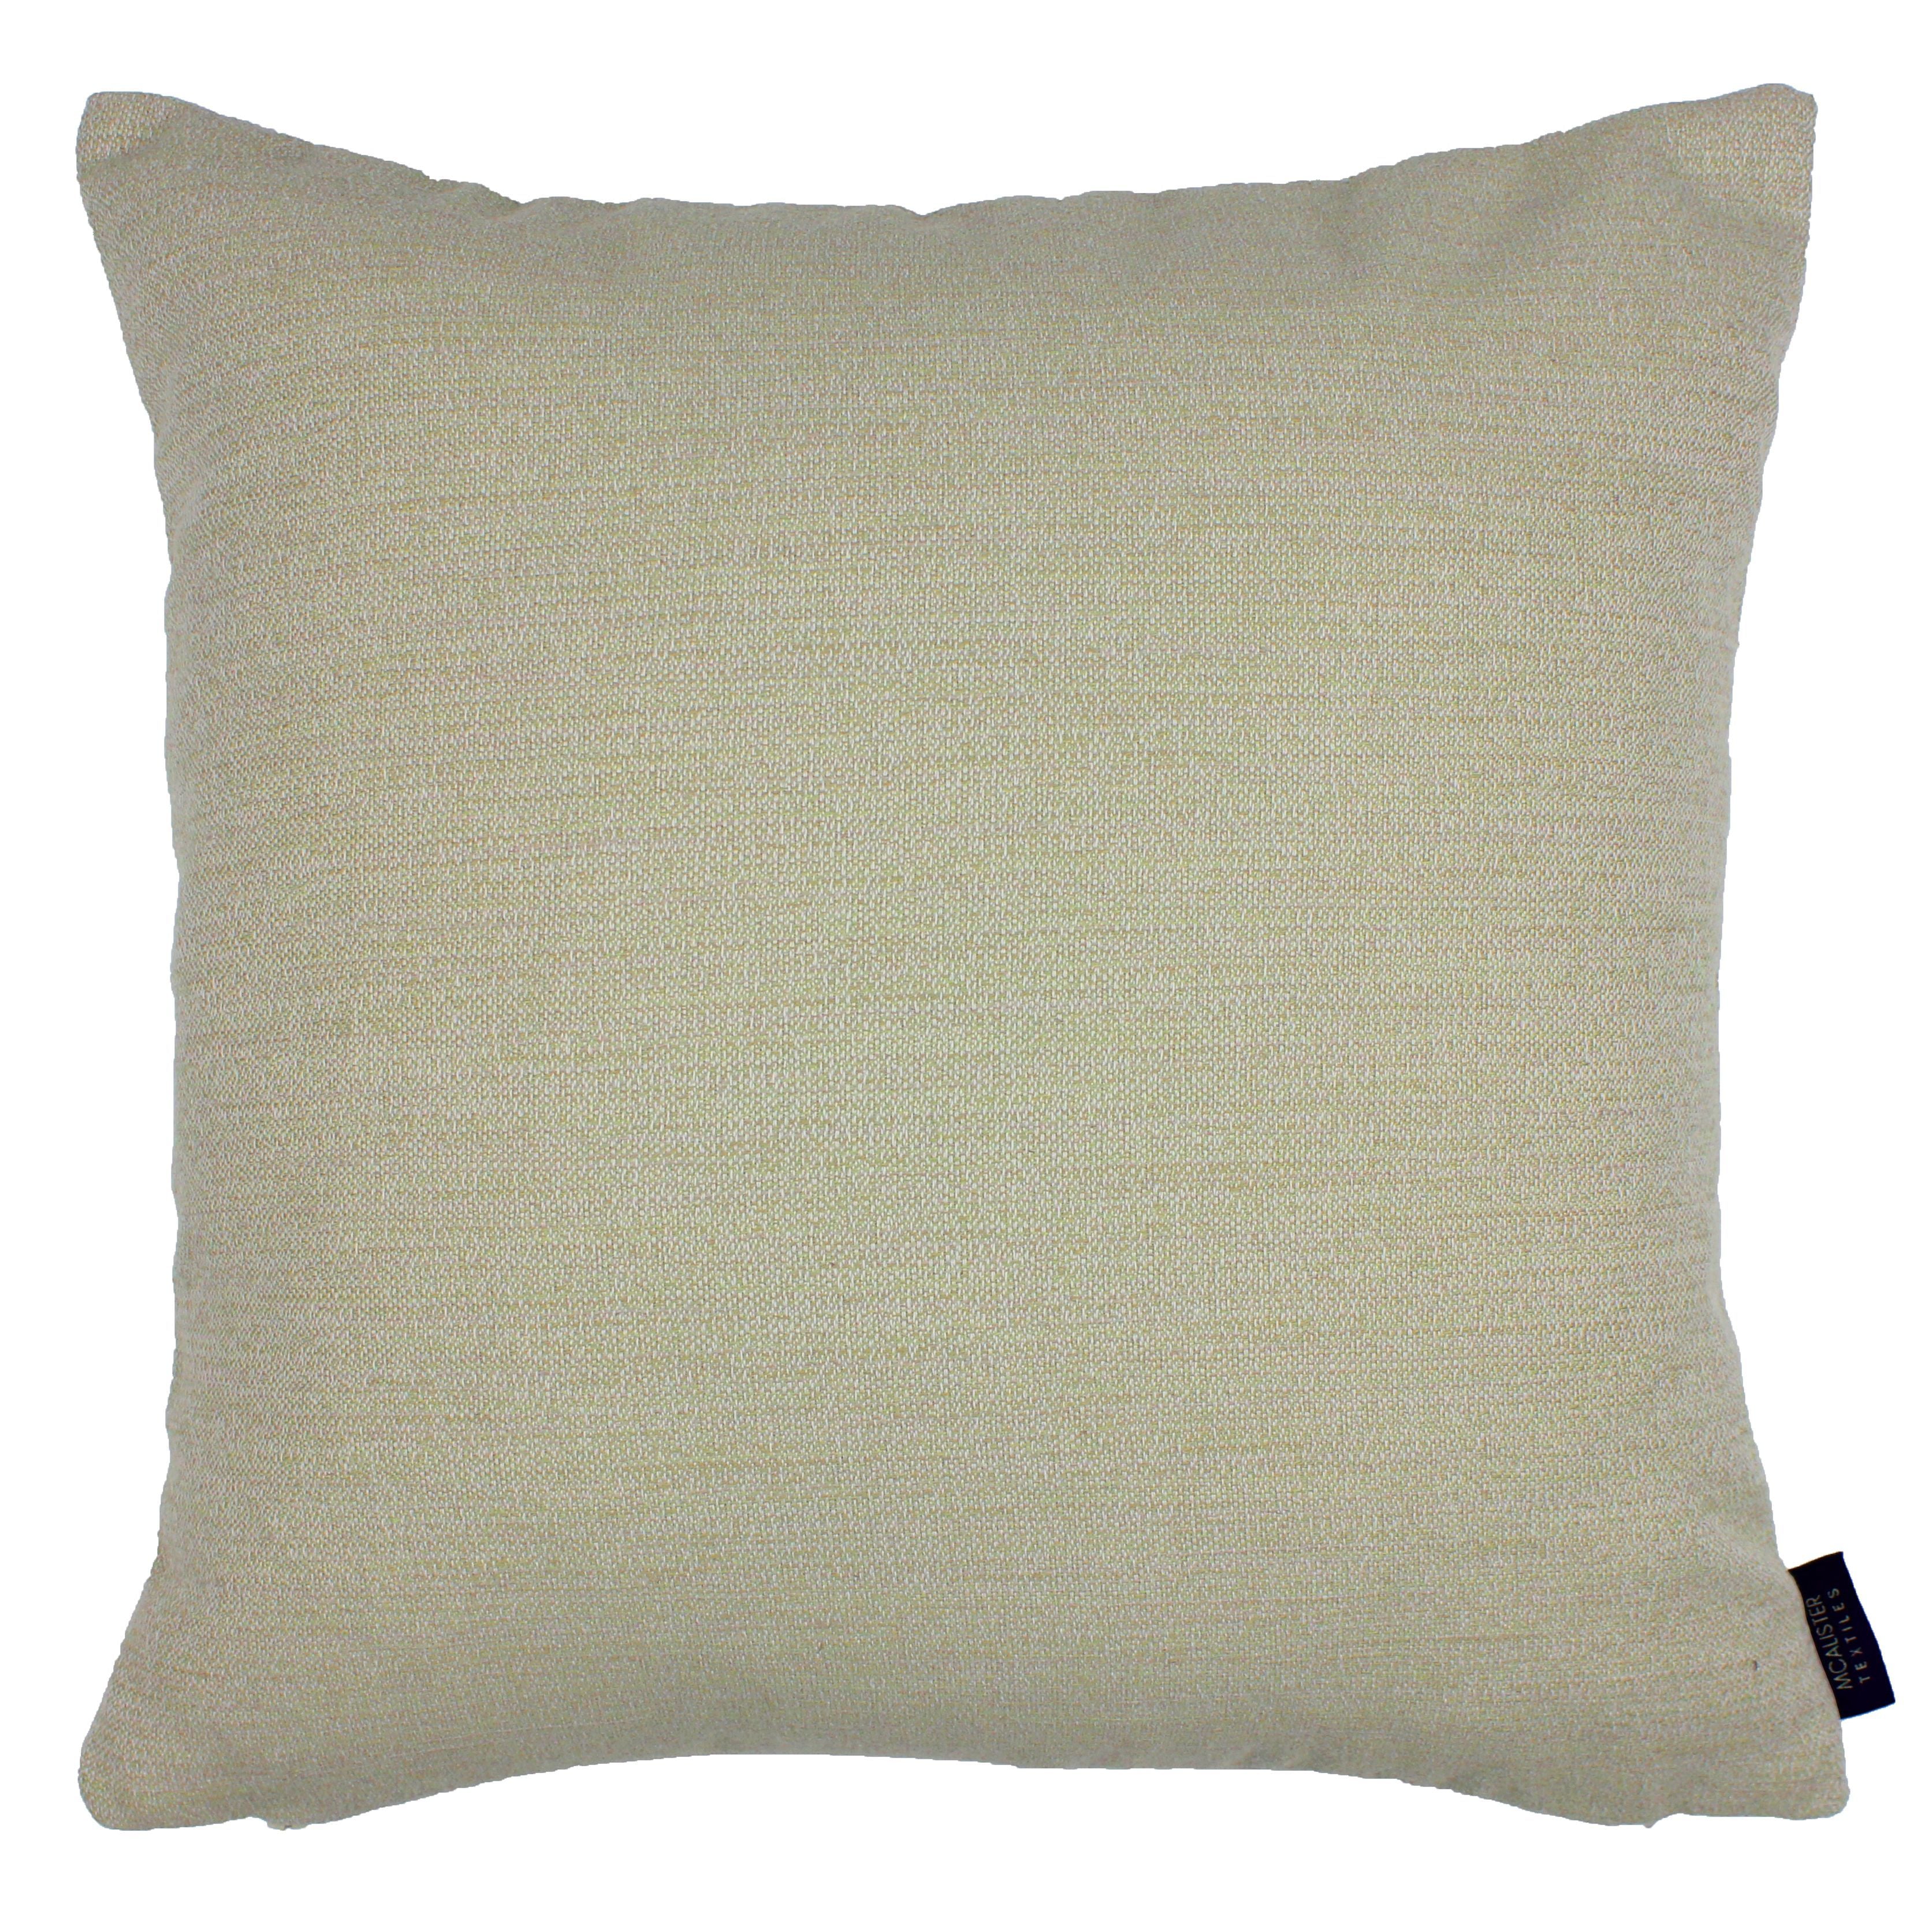 McAlister Textiles Hamleton Soft Green Textured Plain Cushion Cushions and Covers Cover Only 43cm x 43cm 